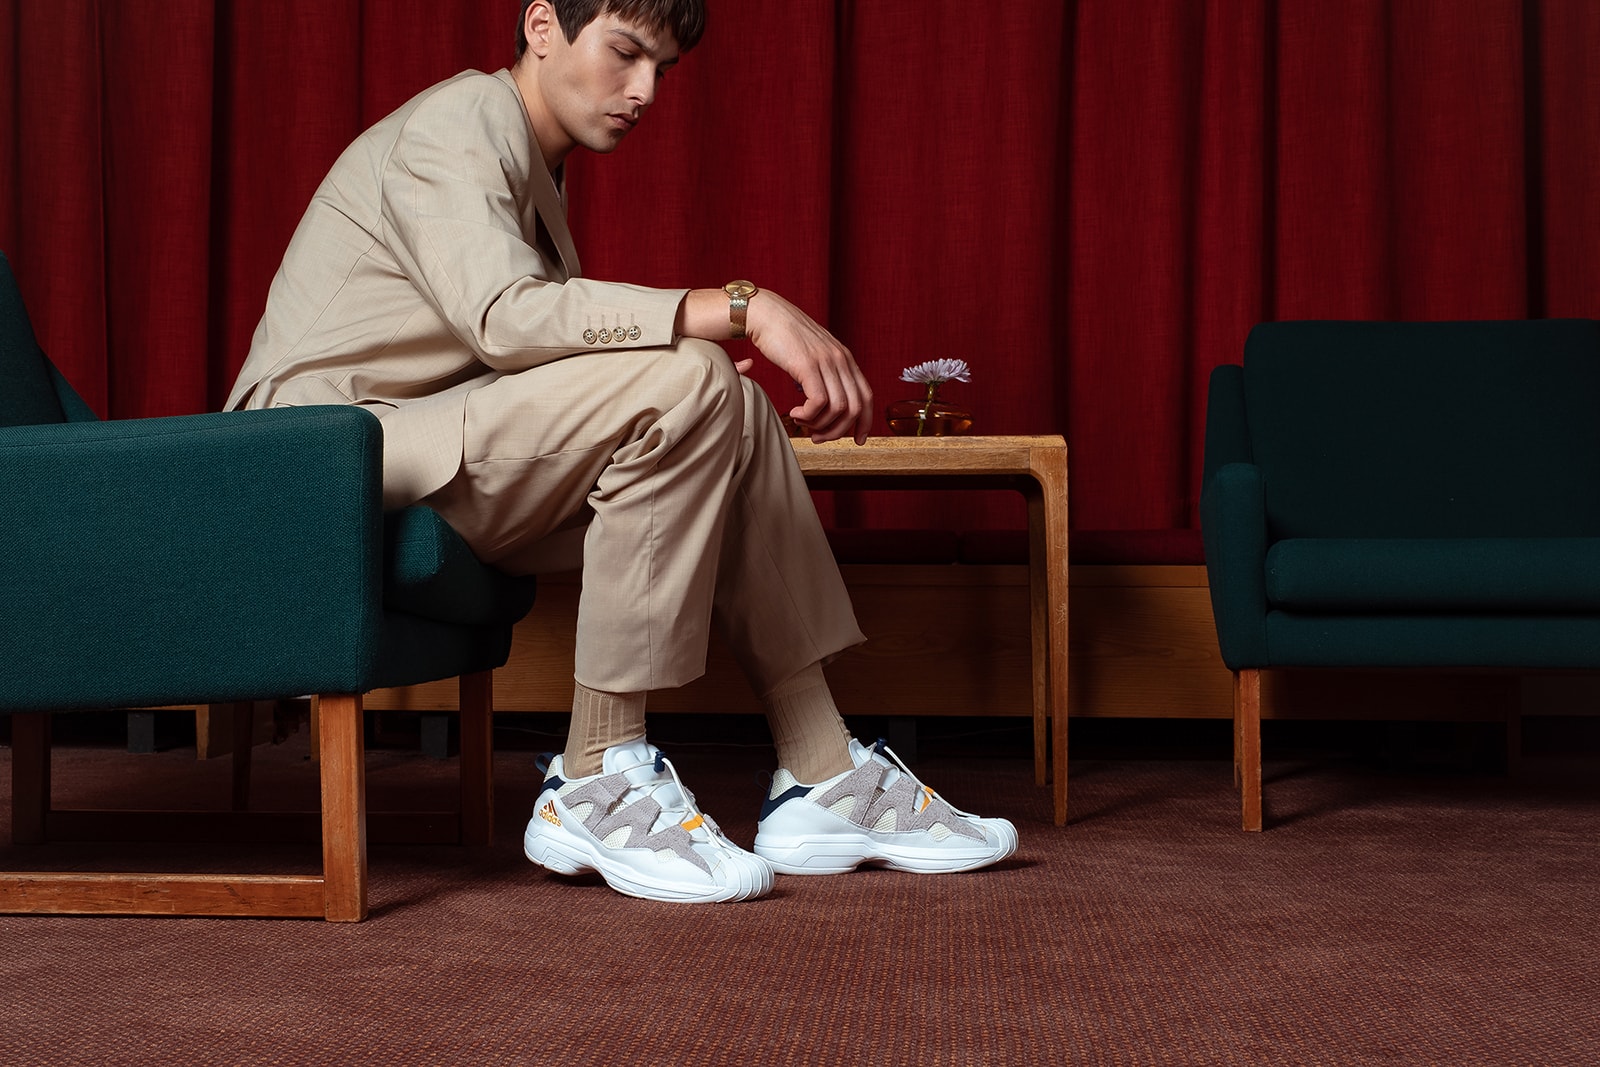 adidas Consortium Workshop Falcon SS2G Sneaker Details Kicks Shoes Trainers Footwear Cop Purchase Buy Now White Primeknit Suede Yellow Detailing Closer Look First